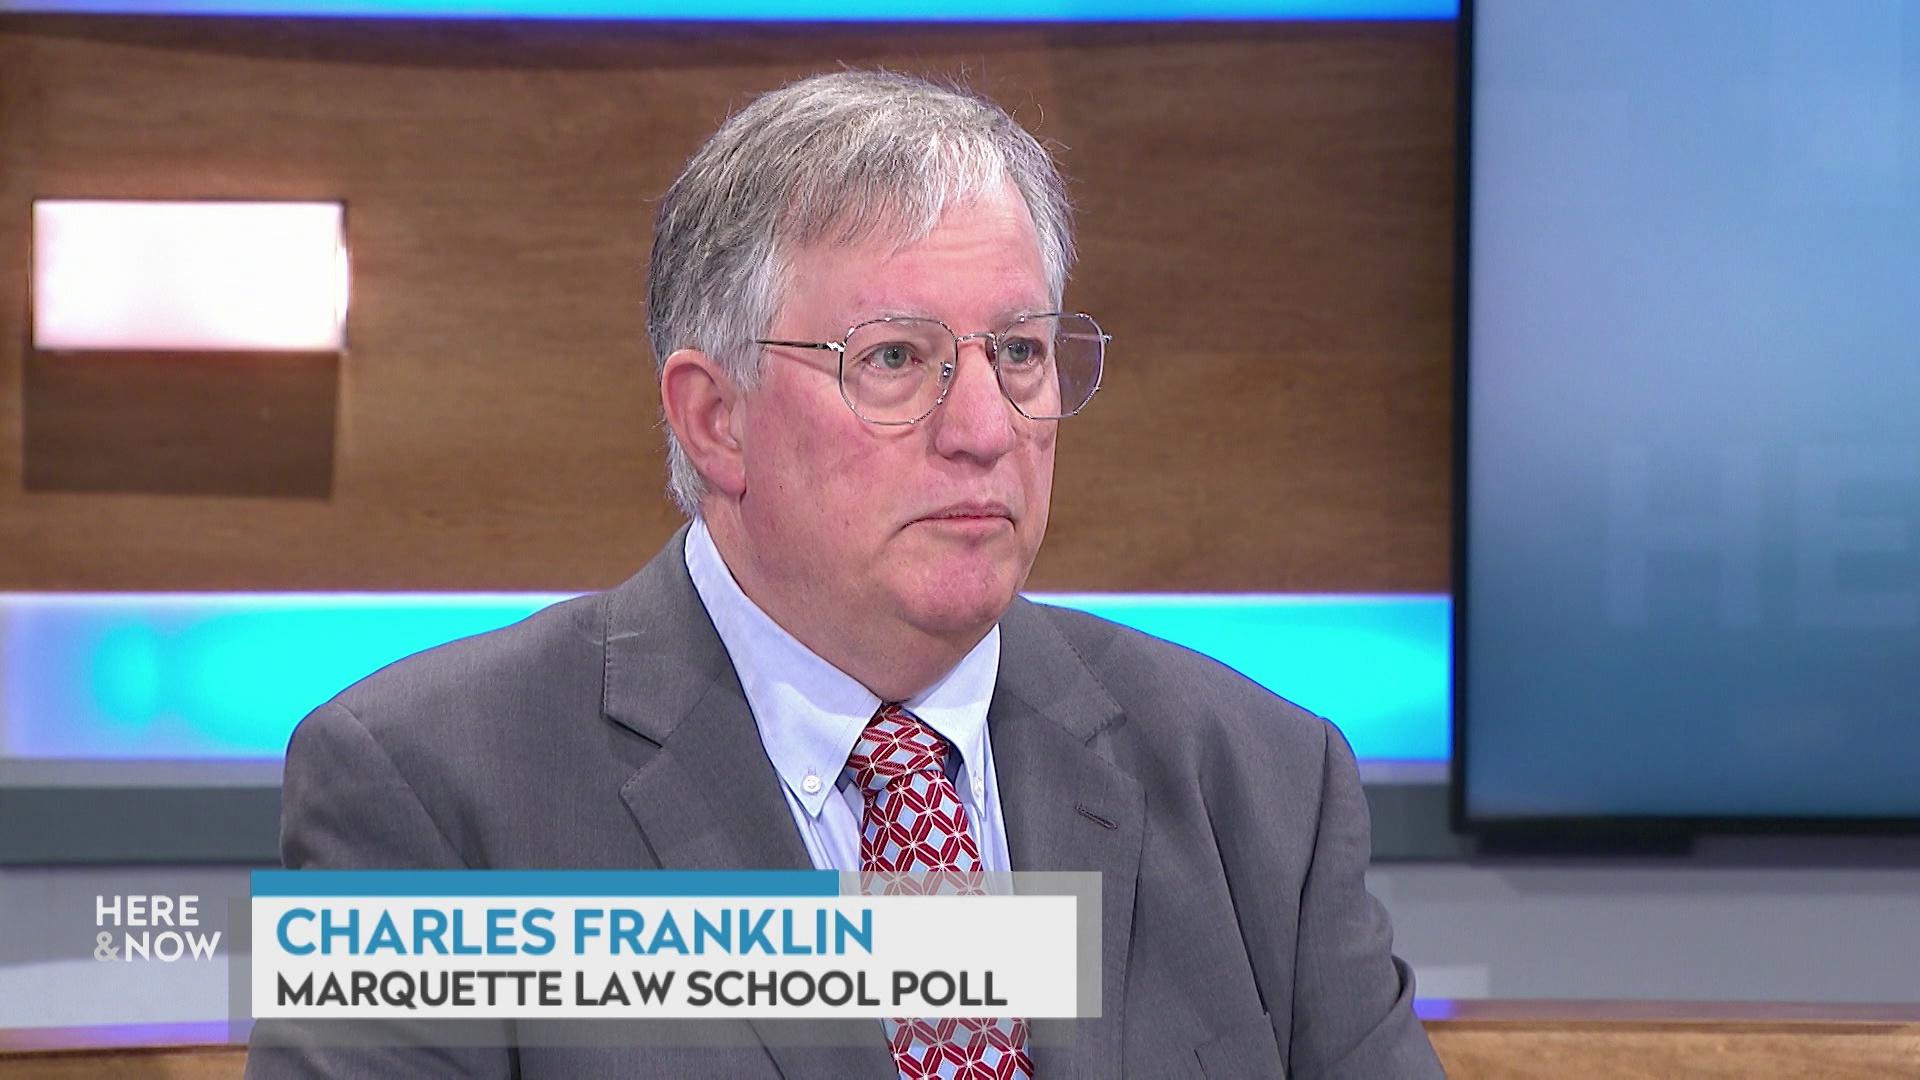 A still image shows Charles Franklin seated at the 'Here & Now' set featuring wood paneling, with a graphic at bottom reading 'Charles Franklin' and 'Marquette Law School Poll.'